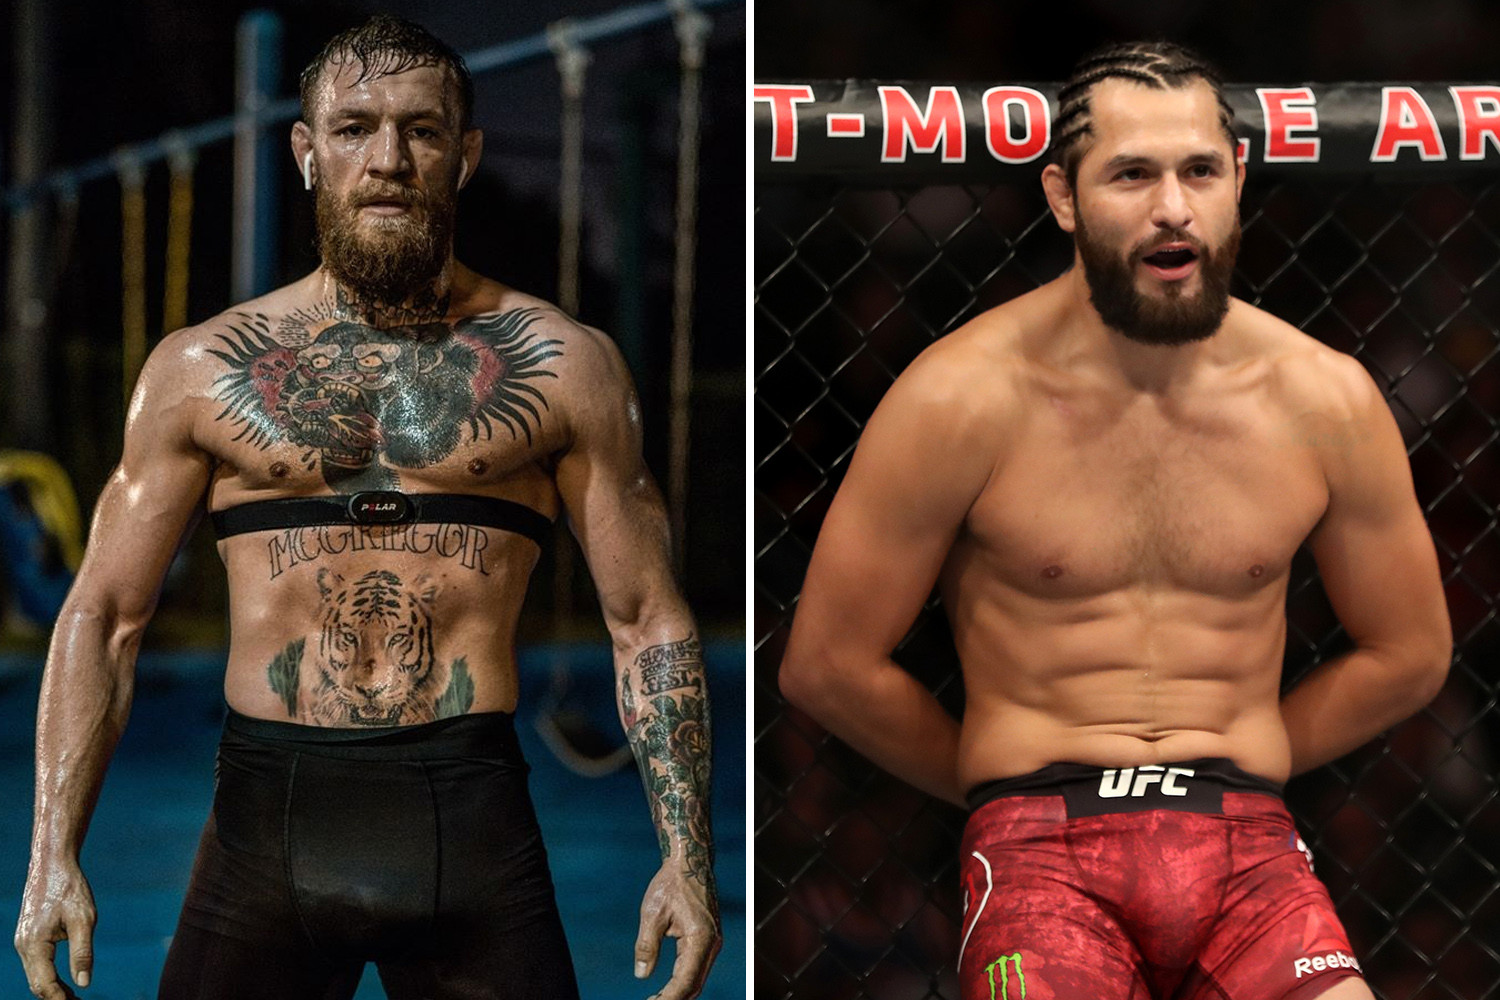 https://sportsandworld.com/ufc-news-jorge-masvidal-is-sure-that-conor-mcgregor-will-never-agree-to-fight-with-him.html